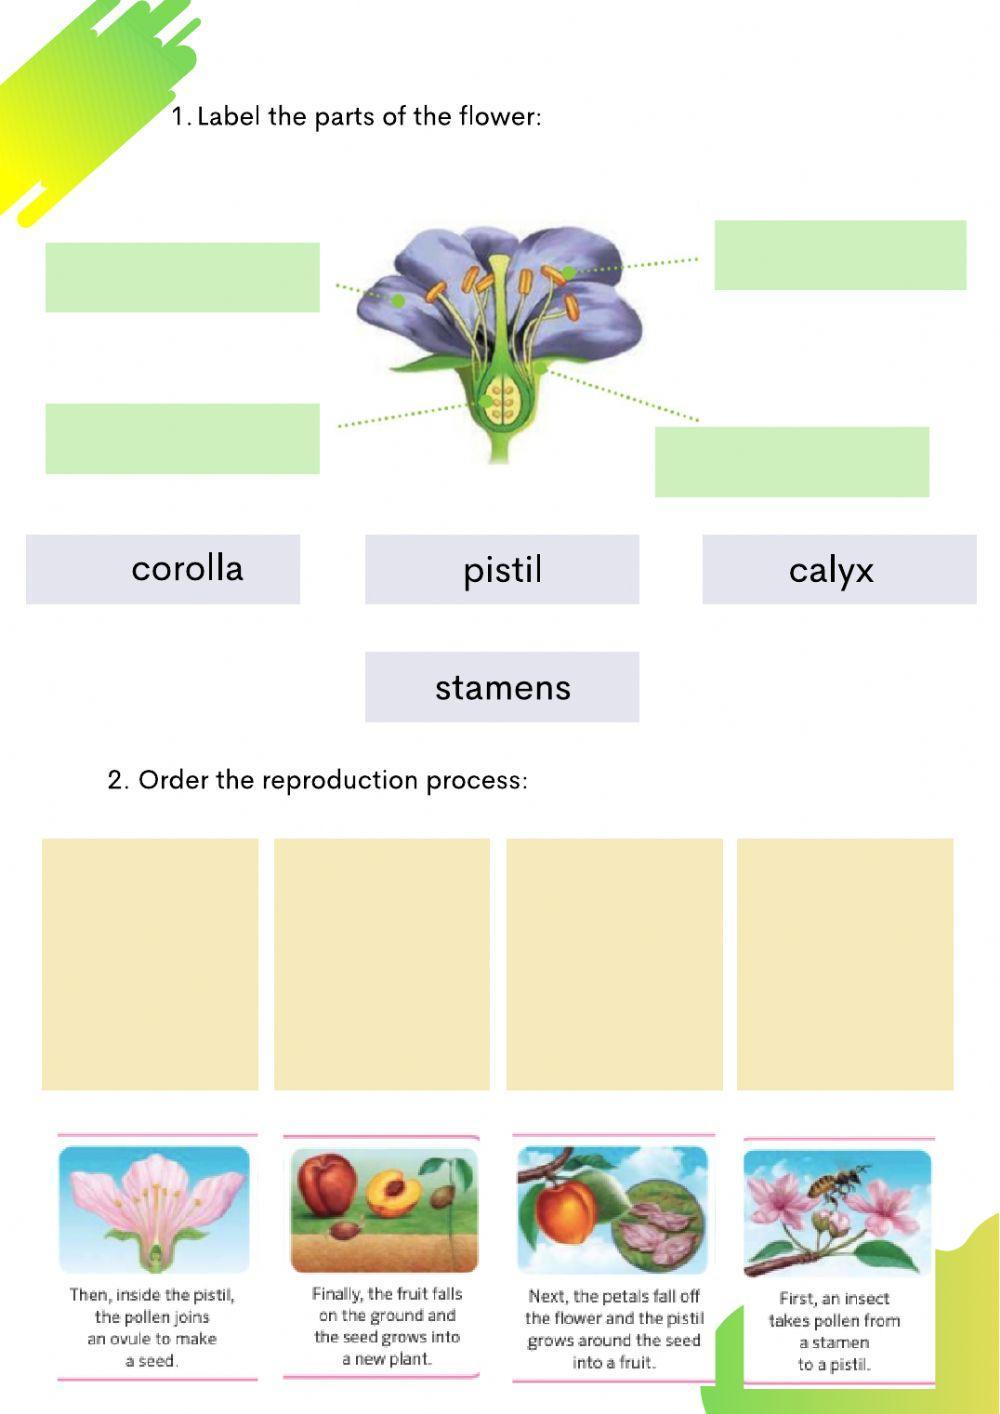 Plant nutrition and reproduction